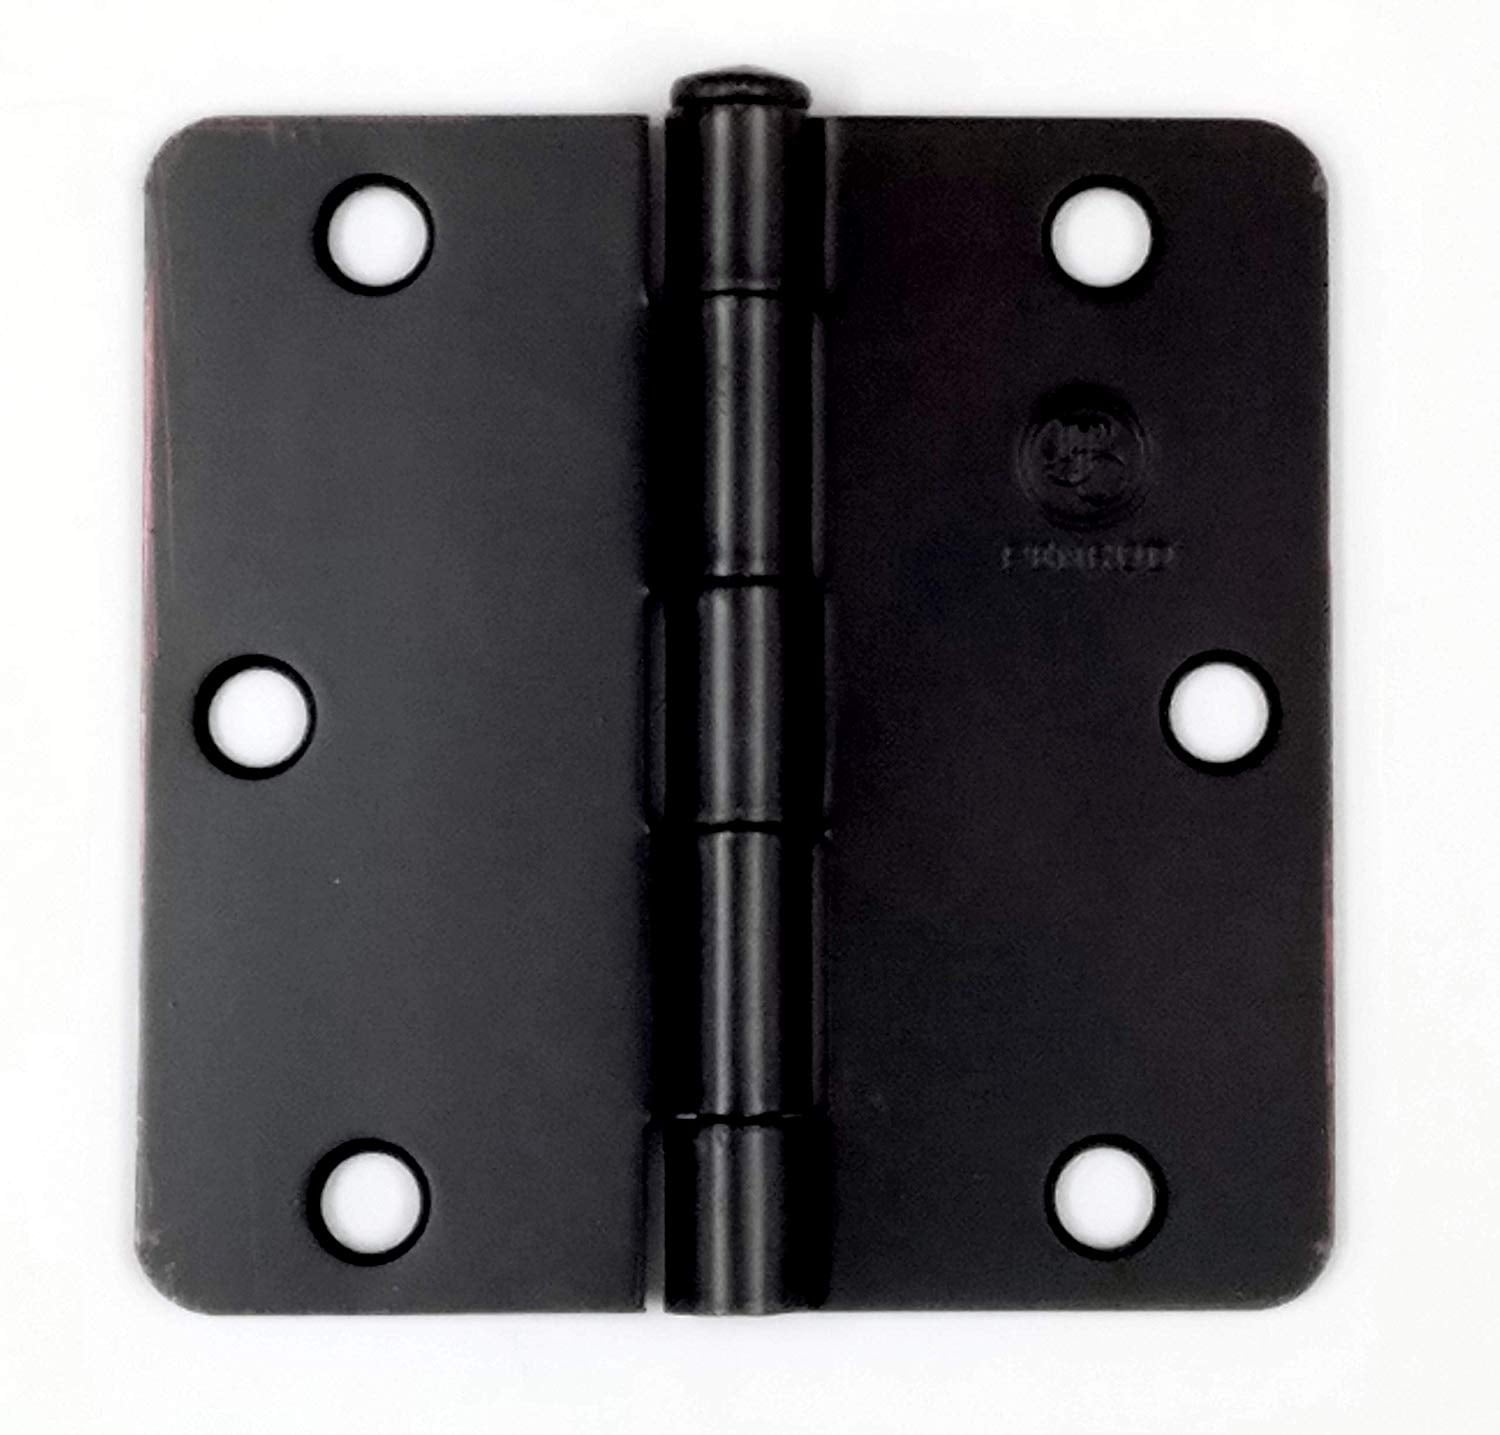 Silver King 35992 Top Plated Hinge